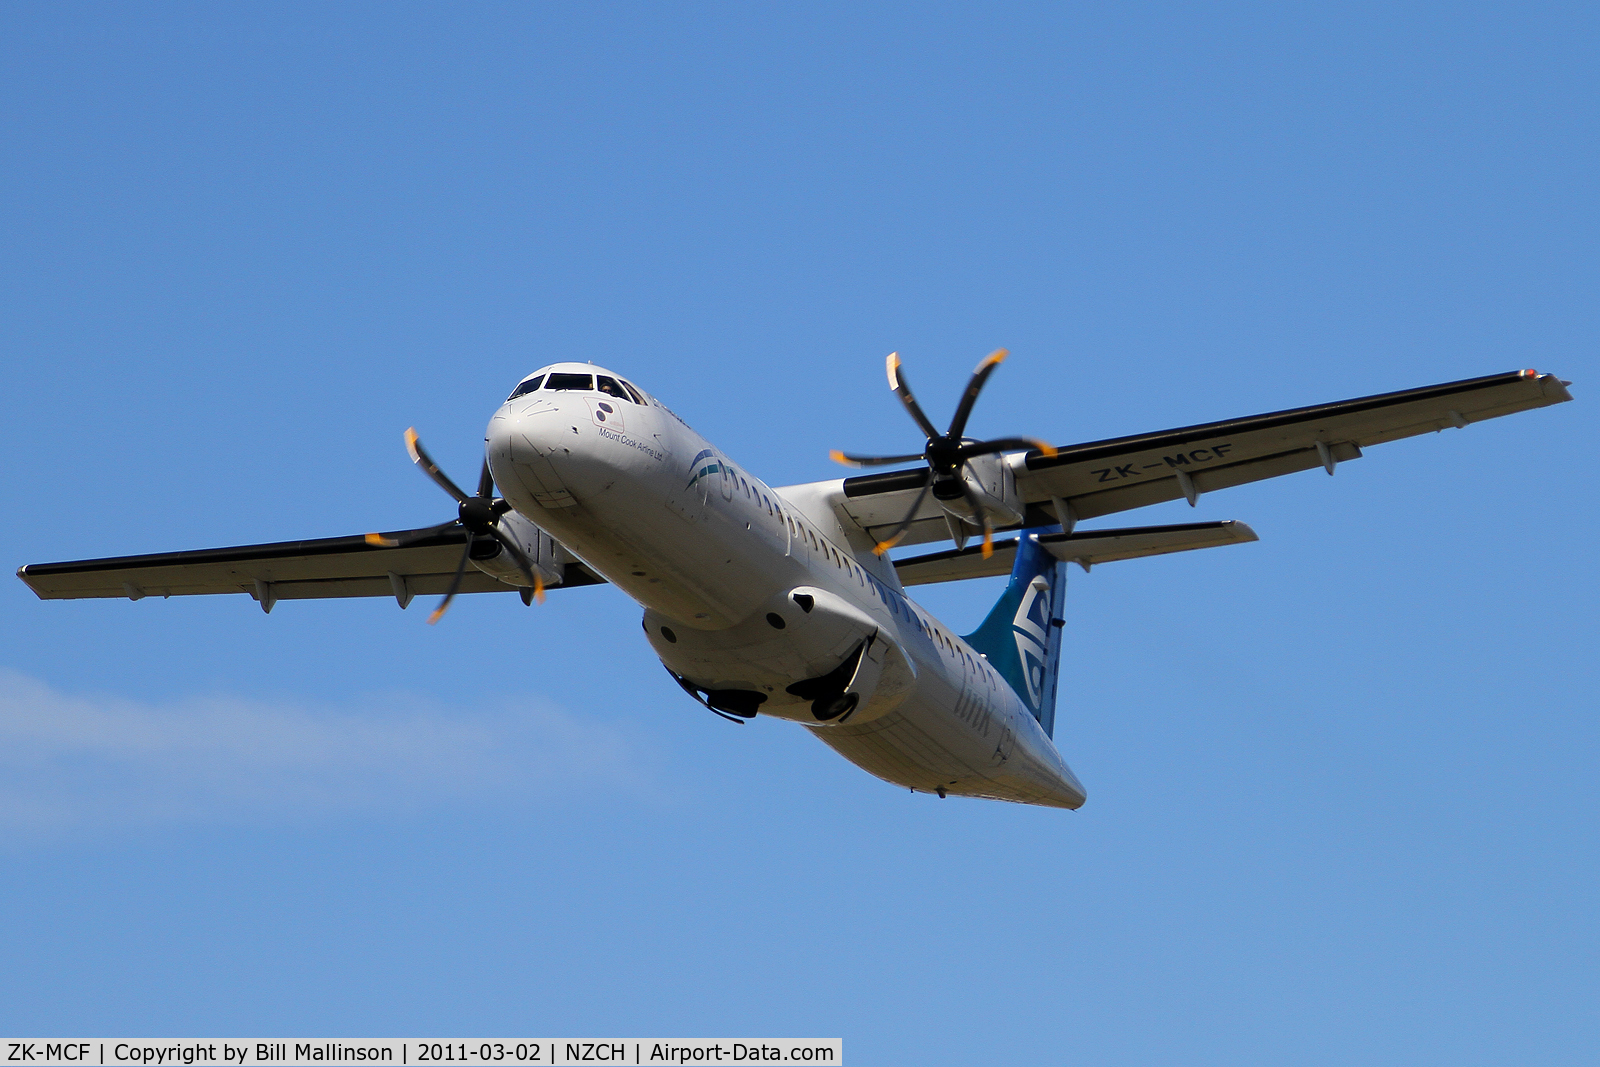 ZK-MCF, 1999 ATR 72-212A C/N 600, bumpy winds at this slower speed